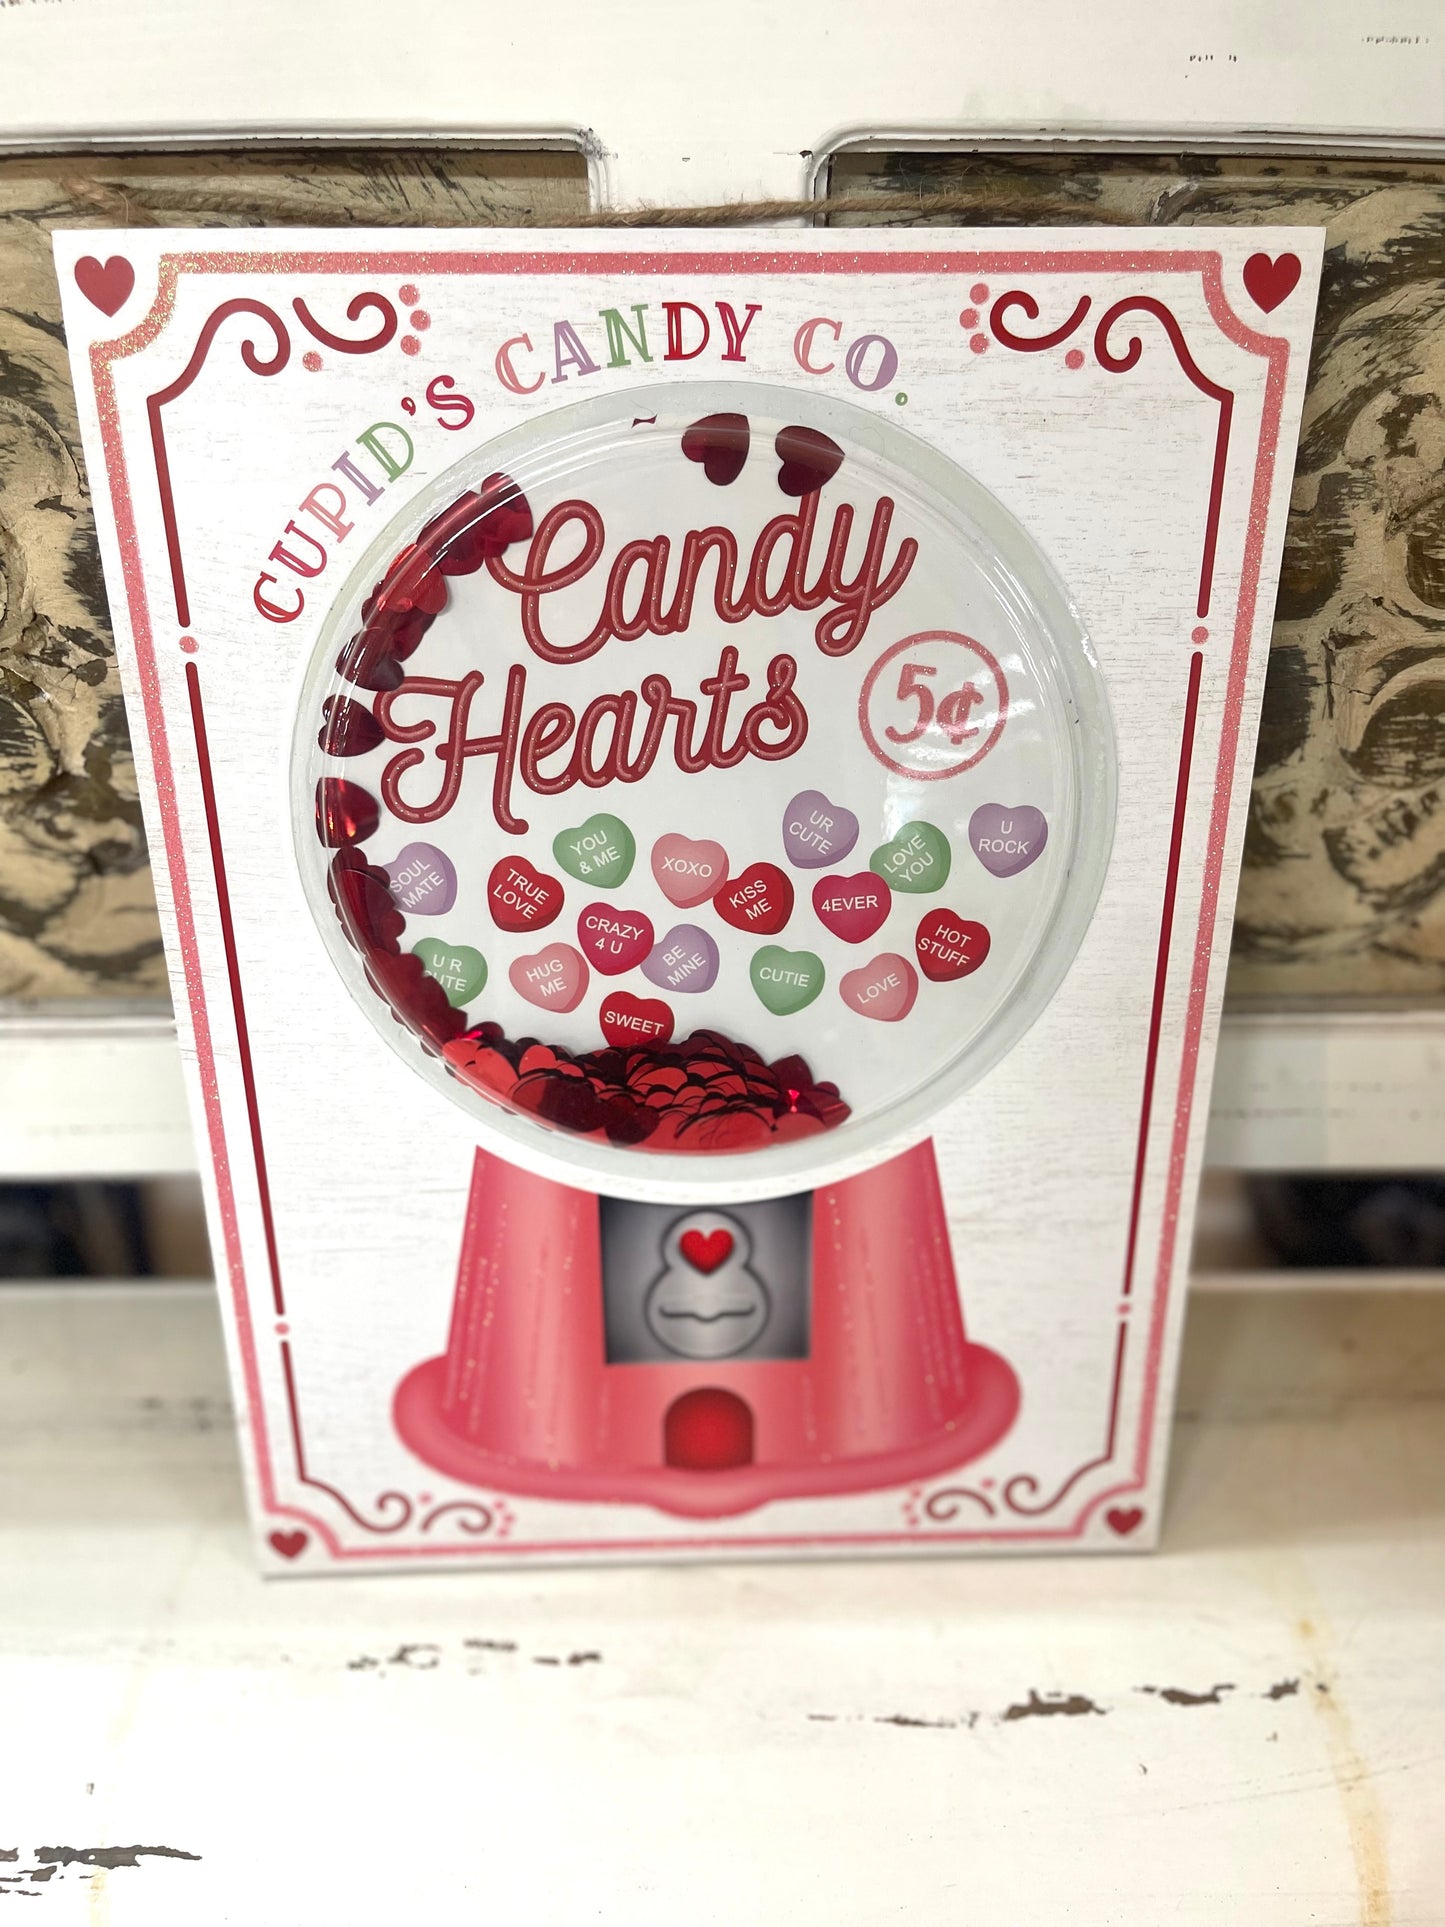 Candy Heart Gumball Machine Wood Sign